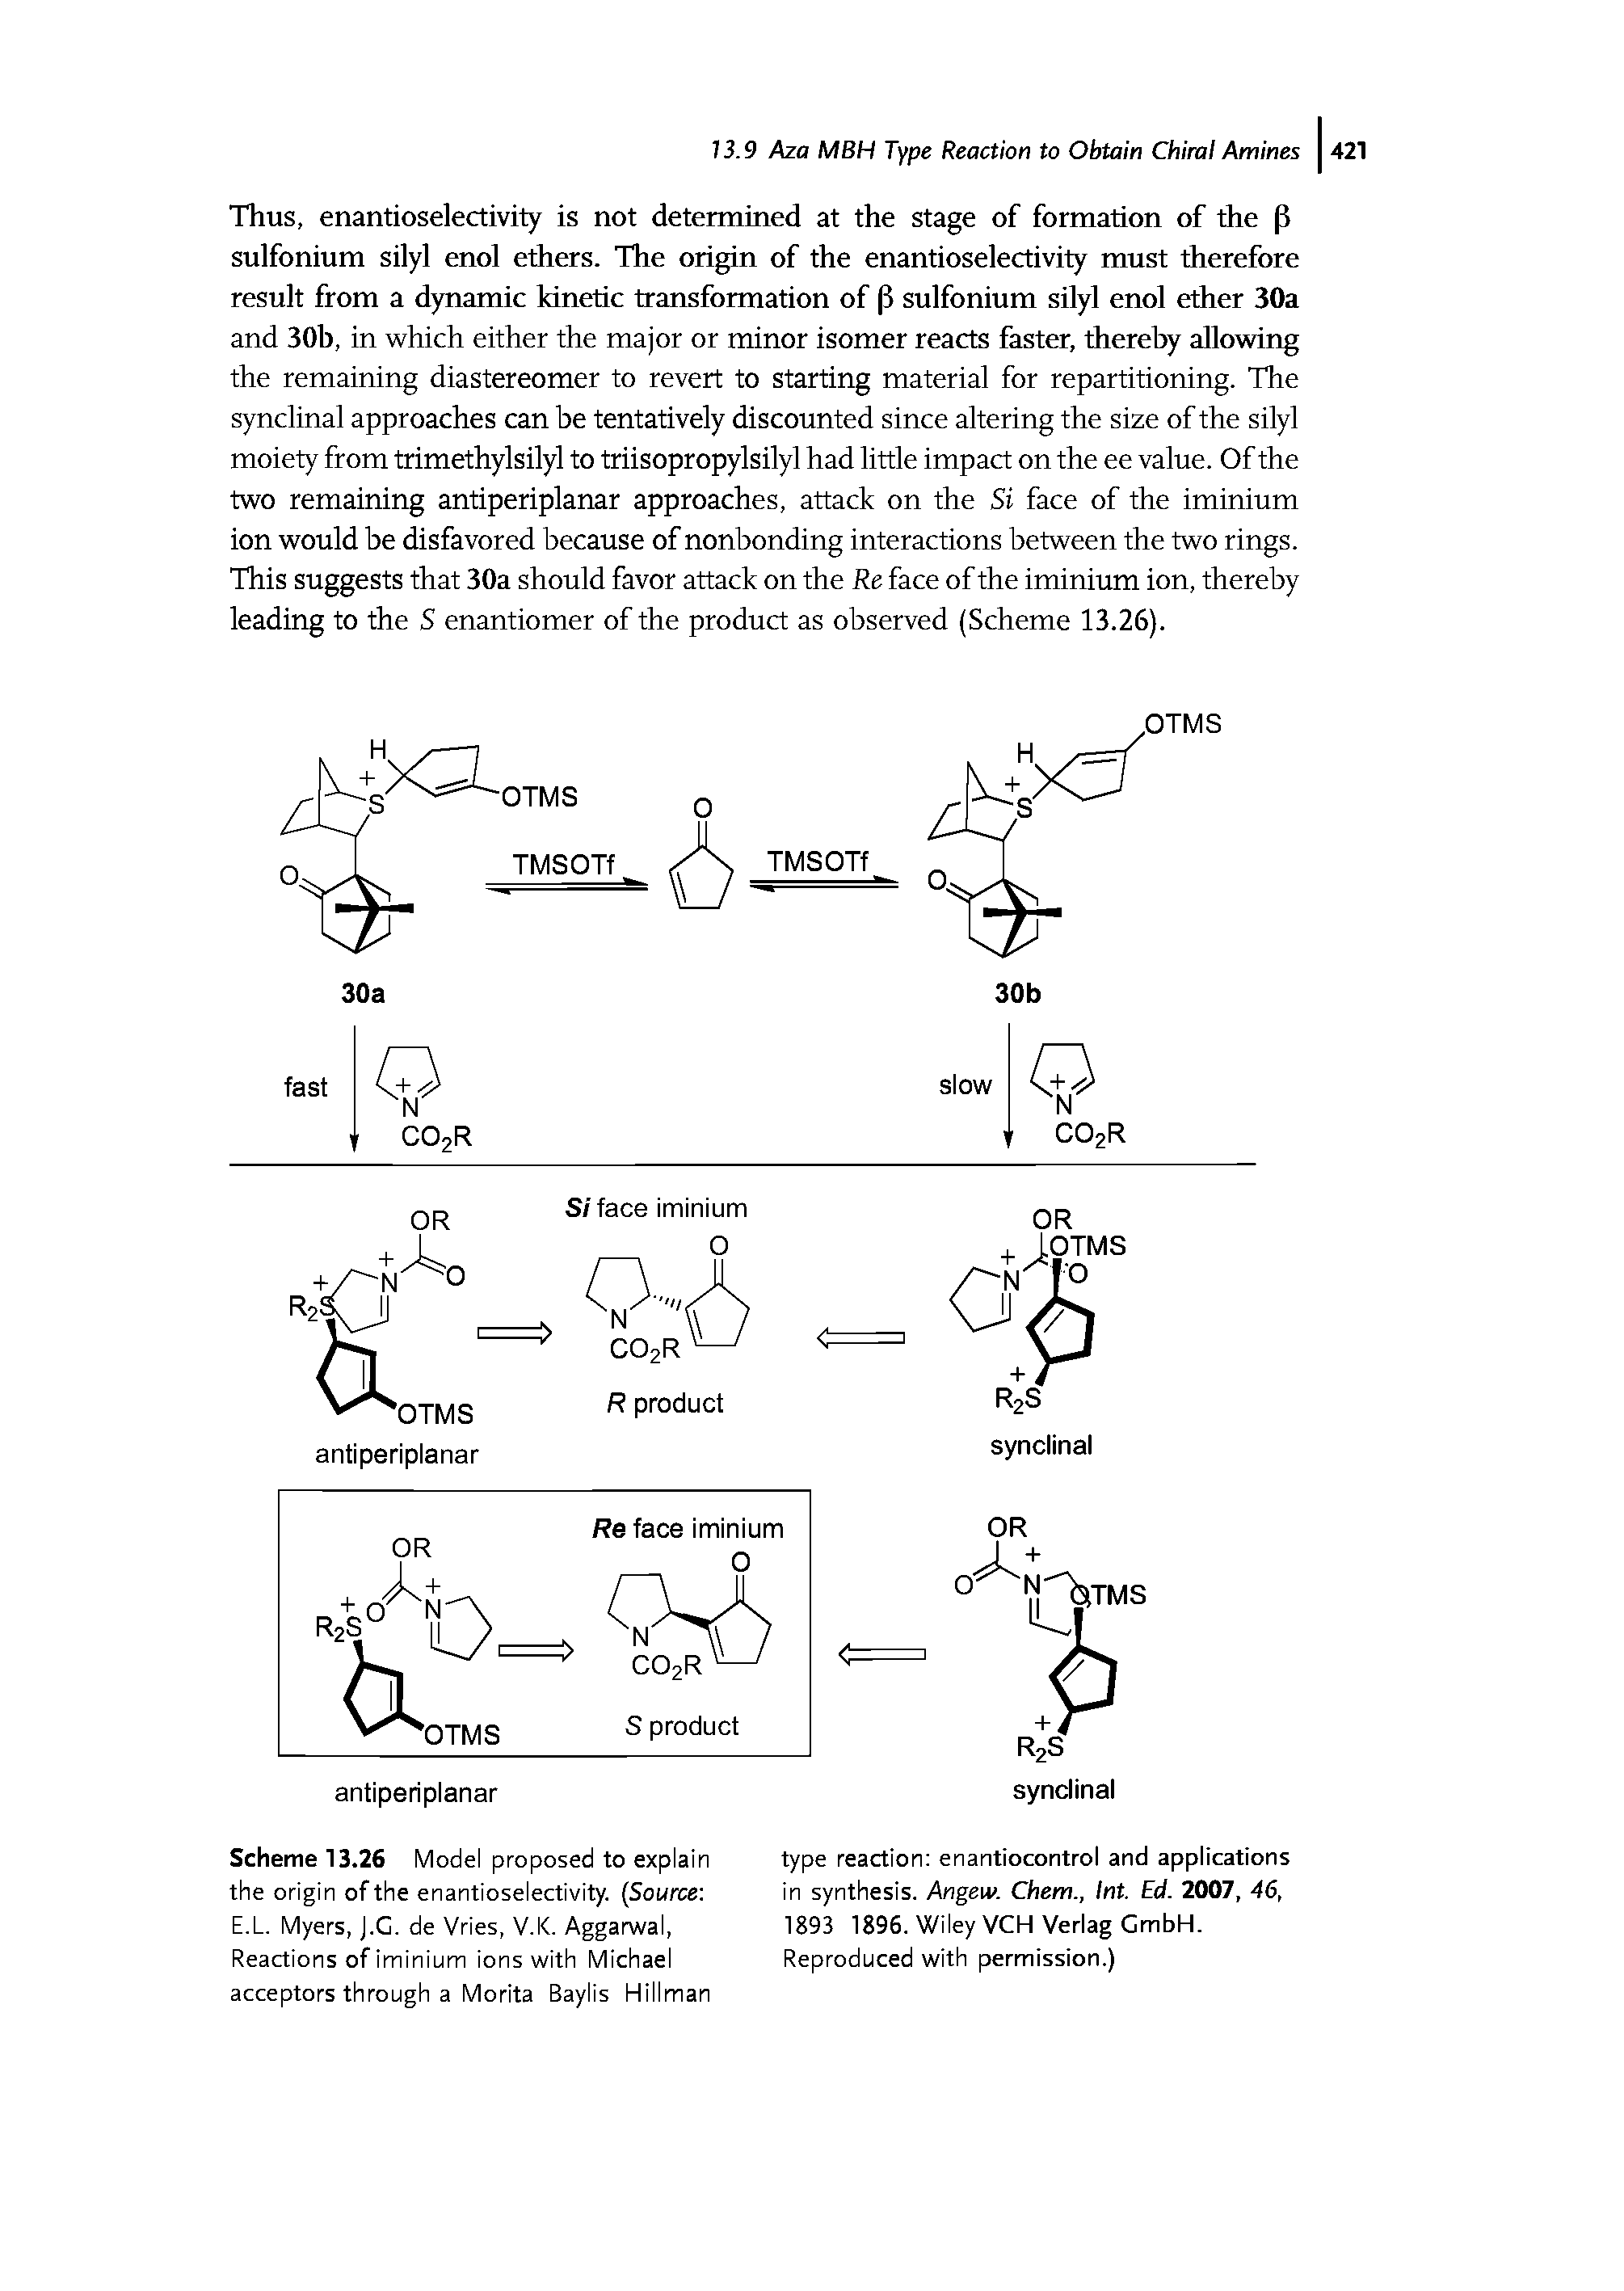 Scheme 13.26 Model proposed to explain the origin ofthe enantioselectivity. (Source E.L. Myers. J.C. de Vries, V.K. Aggarwal, Reactions of iminium ions with Michael acceptors through a Morita Baylis Hillman...